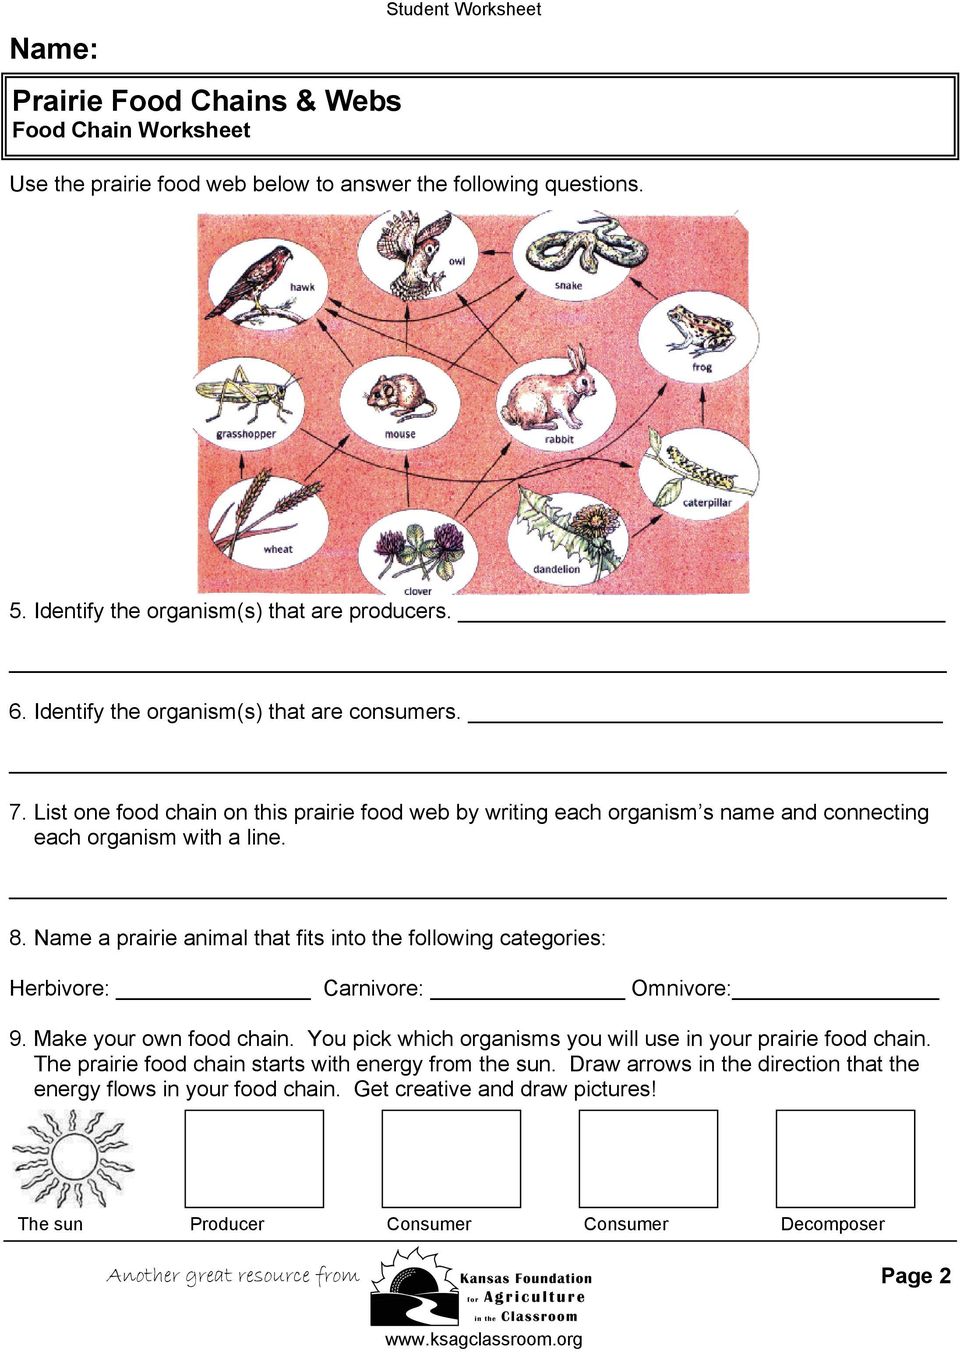 Prairie Food Chains & Webs Producers, Consumers & Decomposers Regarding Food Chain Worksheet Answers